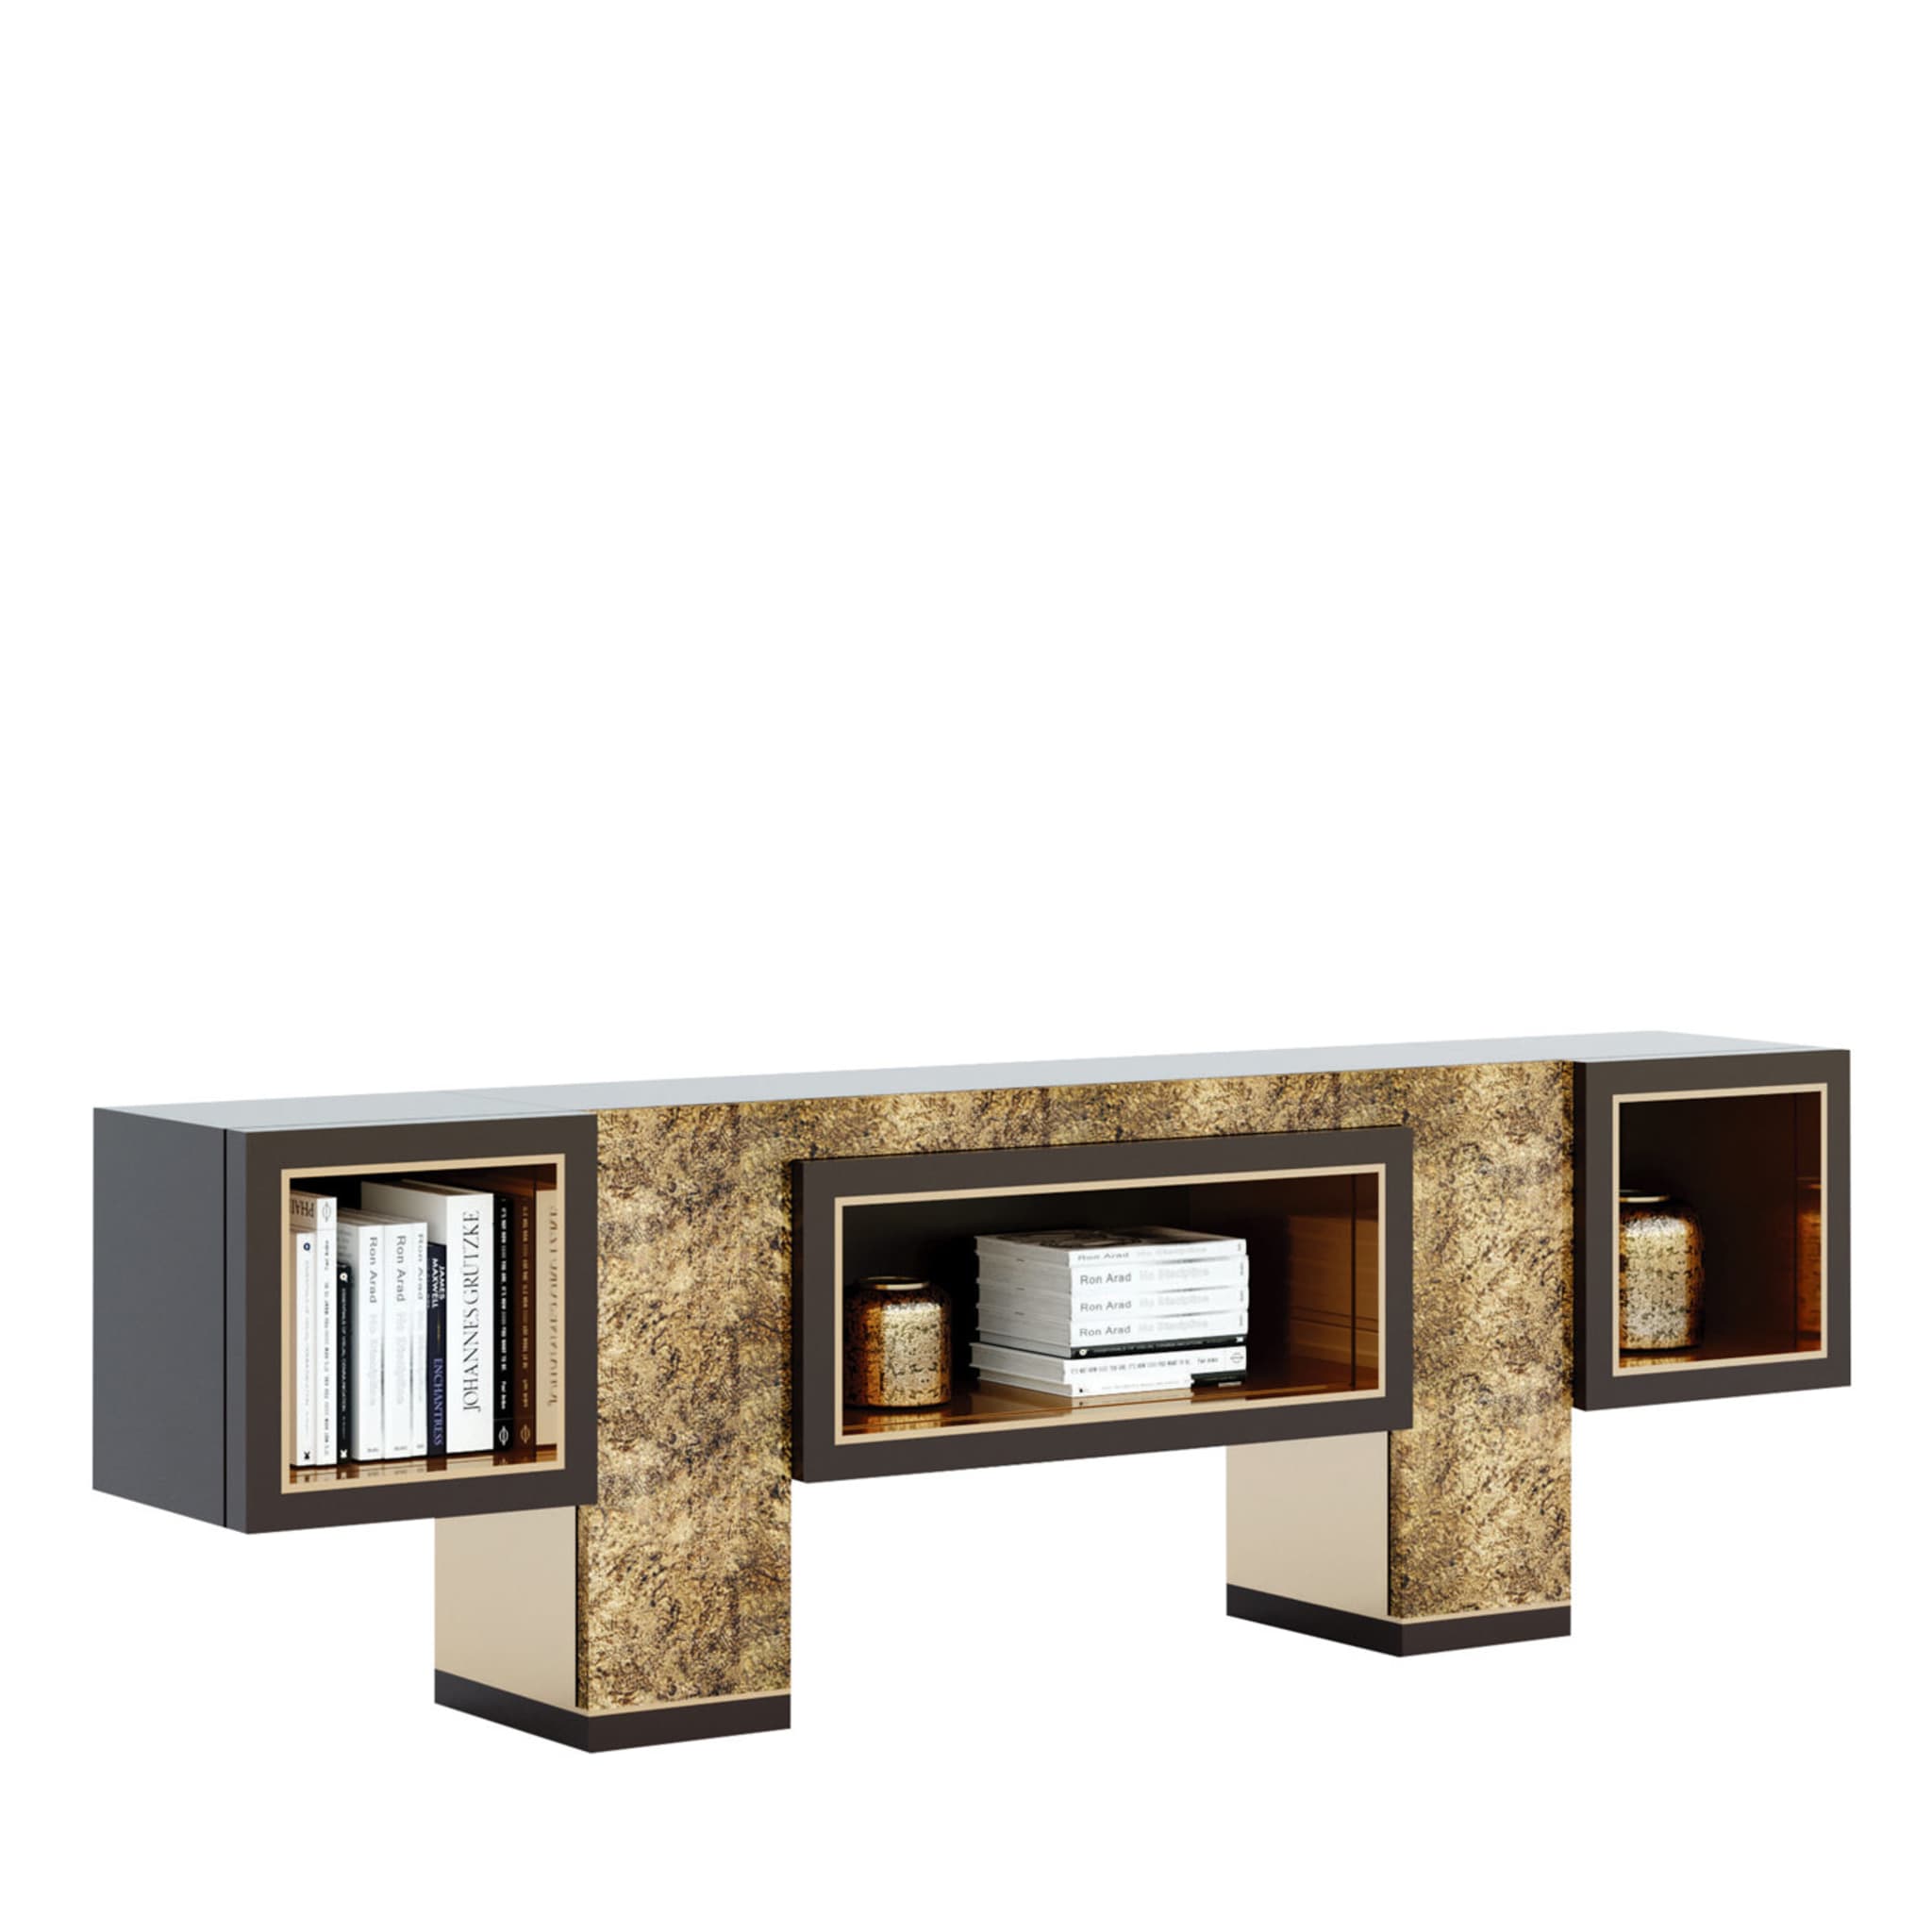 Cobb Low Sideboard by Giannella Ventura - Main view